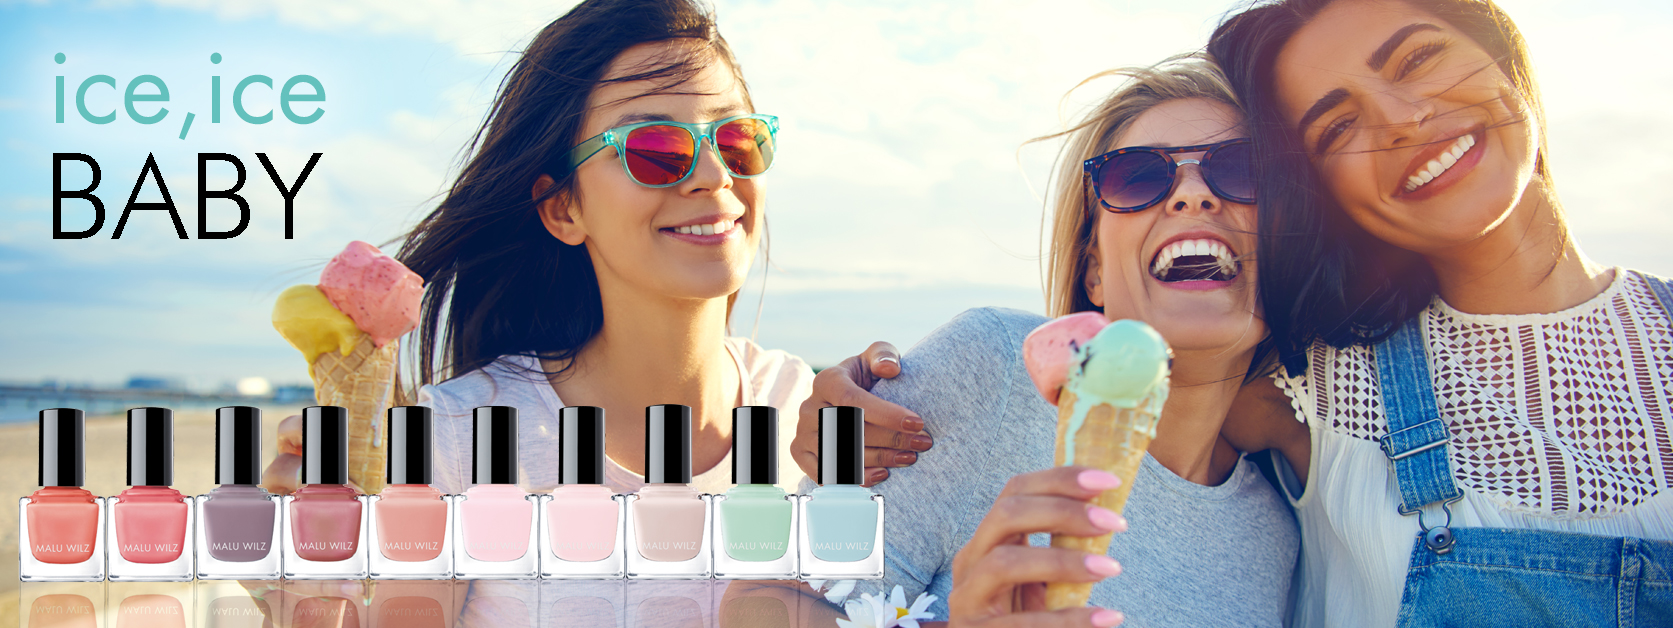 young women on the beach with ice cream and nail polish